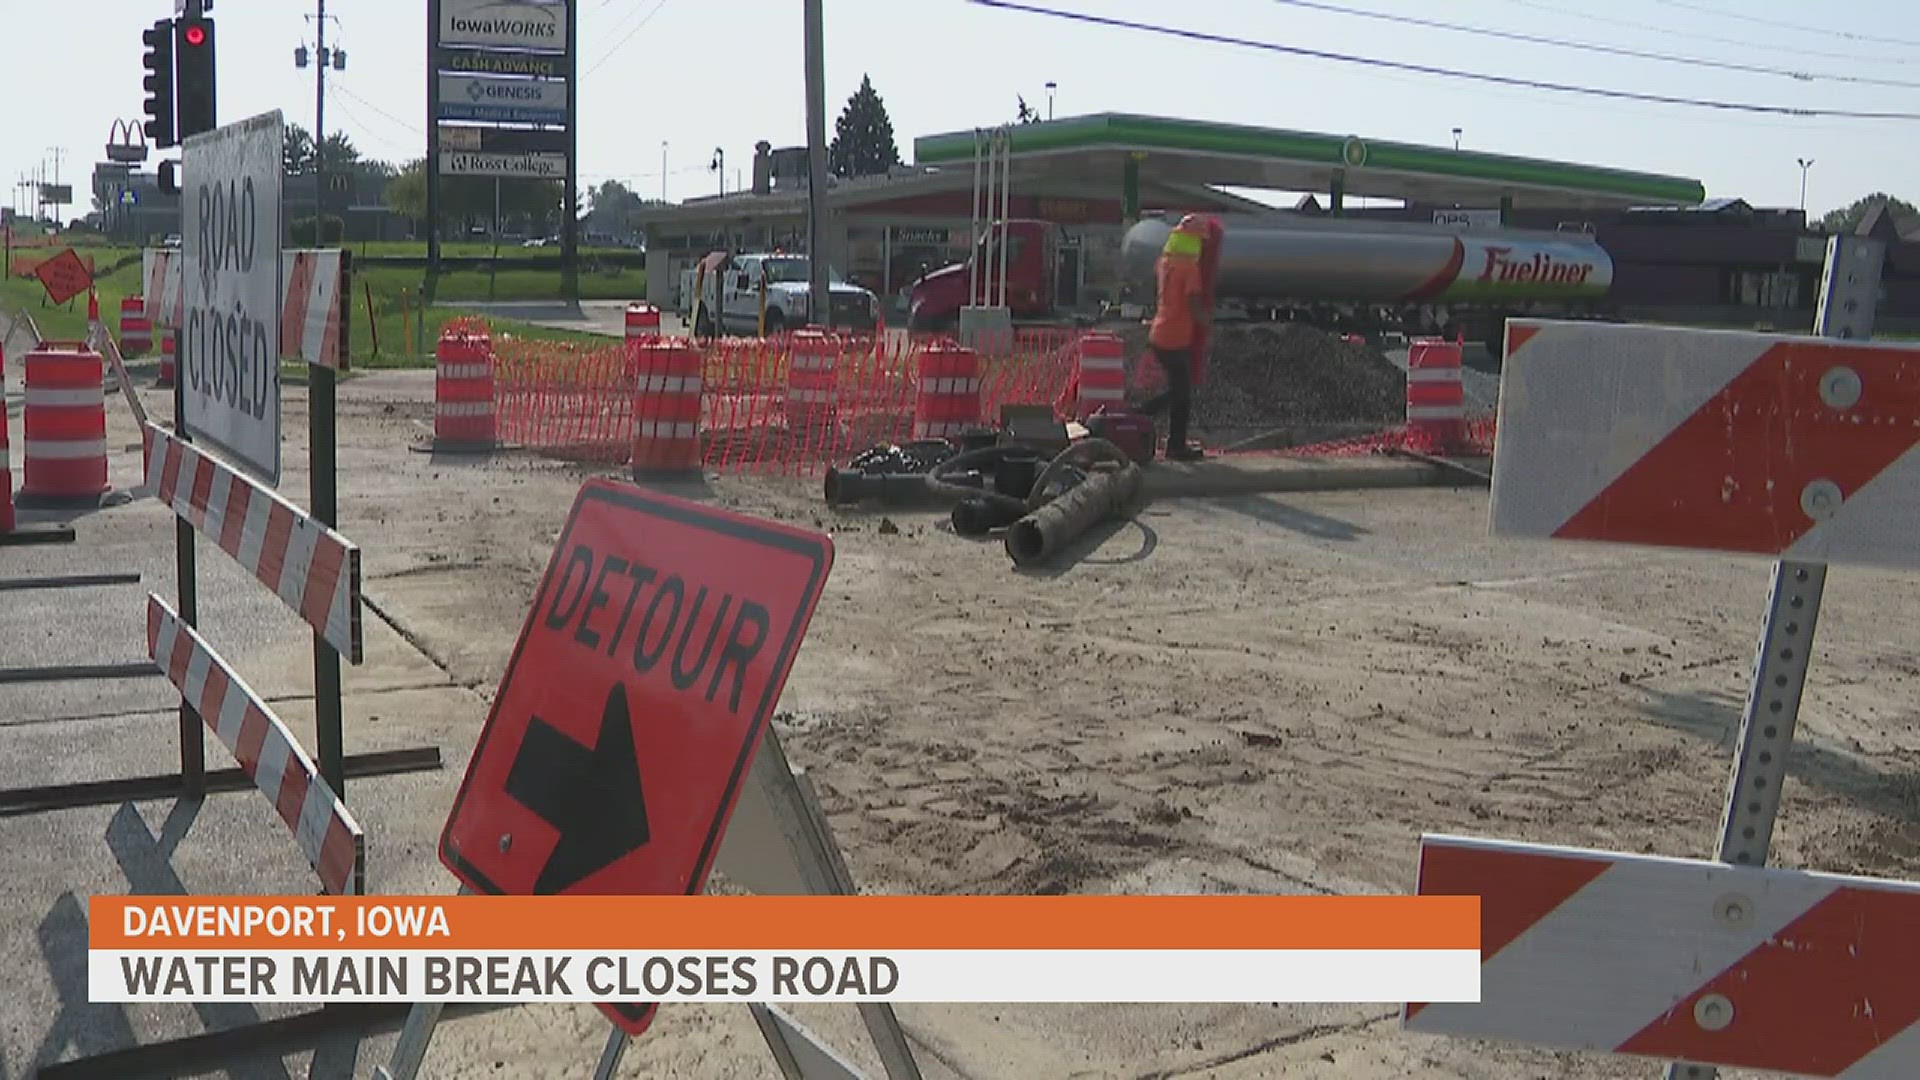 A Davenport water main break occurred on Kimberly and Eastern last Monday. Drivers are advised to avoid Eastern Avenue for a few days until repairs are complete.